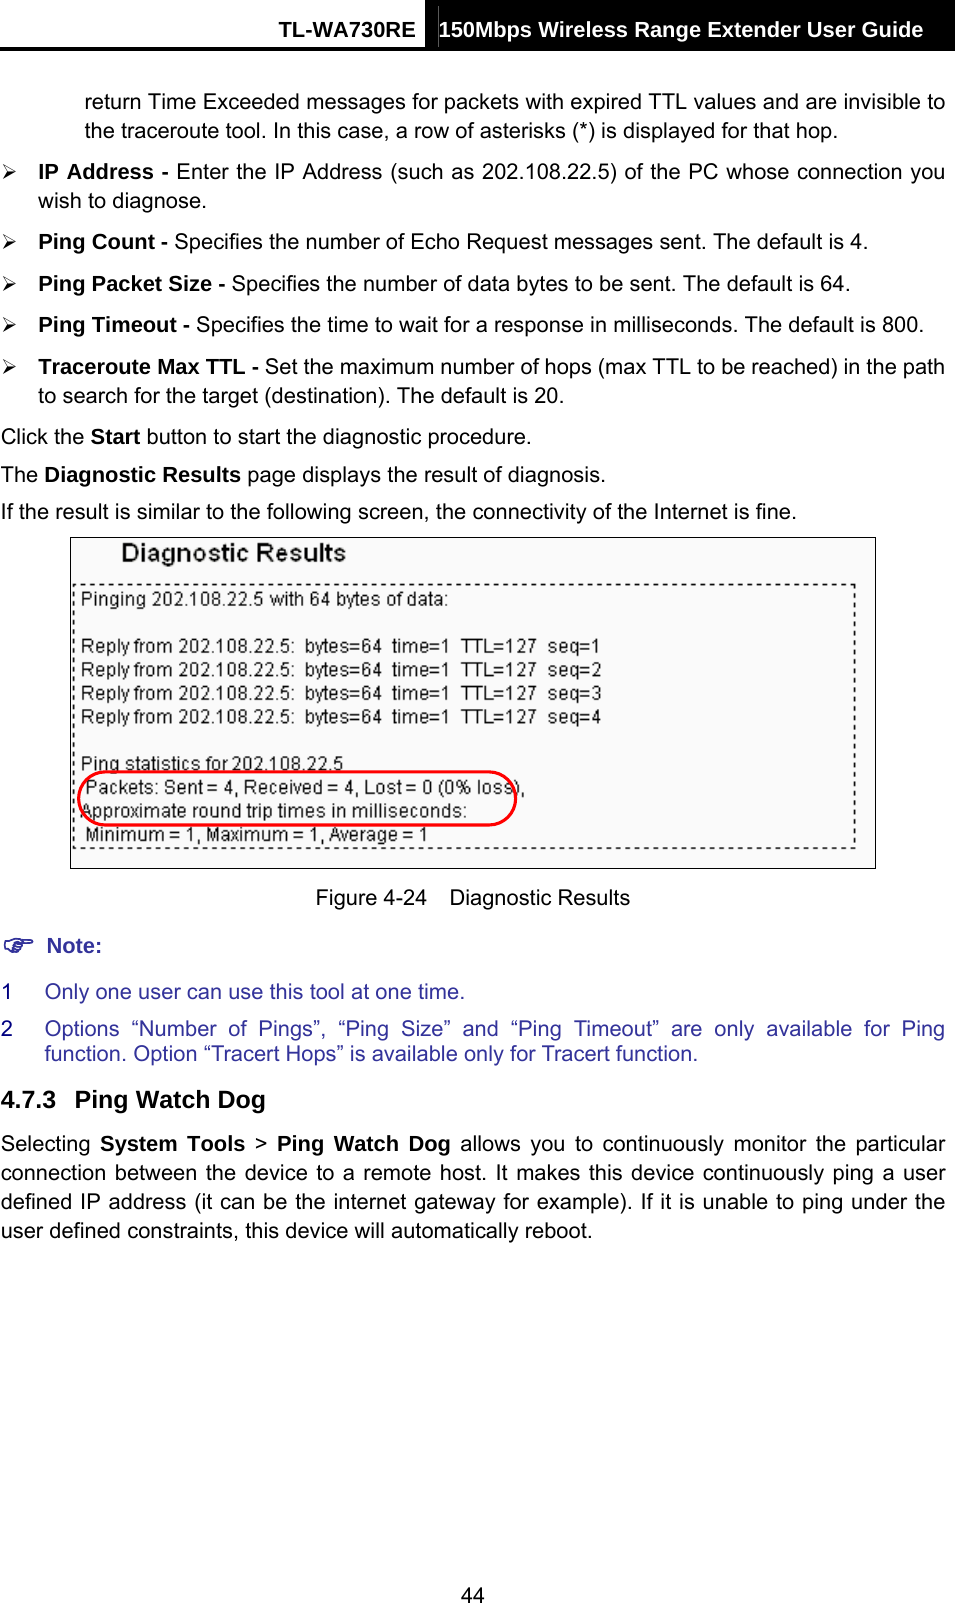 TL-WA730RE 150Mbps Wireless Range Extender User Guide  return Time Exceeded messages for packets with expired TTL values and are invisible to the traceroute tool. In this case, a row of asterisks (*) is displayed for that hop.   ¾ IP Address - Enter the IP Address (such as 202.108.22.5) of the PC whose connection you wish to diagnose. ¾ Ping Count - Specifies the number of Echo Request messages sent. The default is 4.   ¾ Ping Packet Size - Specifies the number of data bytes to be sent. The default is 64. ¾ Ping Timeout - Specifies the time to wait for a response in milliseconds. The default is 800. ¾ Traceroute Max TTL - Set the maximum number of hops (max TTL to be reached) in the path to search for the target (destination). The default is 20.   Click the Start button to start the diagnostic procedure. The Diagnostic Results page displays the result of diagnosis. If the result is similar to the following screen, the connectivity of the Internet is fine.  Figure 4-24  Diagnostic Results ) Note: 1  Only one user can use this tool at one time.   2  Options “Number of Pings”, “Ping Size” and “Ping Timeout” are only available for Ping function. Option “Tracert Hops” is available only for Tracert function. 4.7.3  Ping Watch Dog Selecting  System Tools &gt; Ping Watch Dog allows you to continuously monitor the particular connection between the device to a remote host. It makes this device continuously ping a user defined IP address (it can be the internet gateway for example). If it is unable to ping under the user defined constraints, this device will automatically reboot. 44 